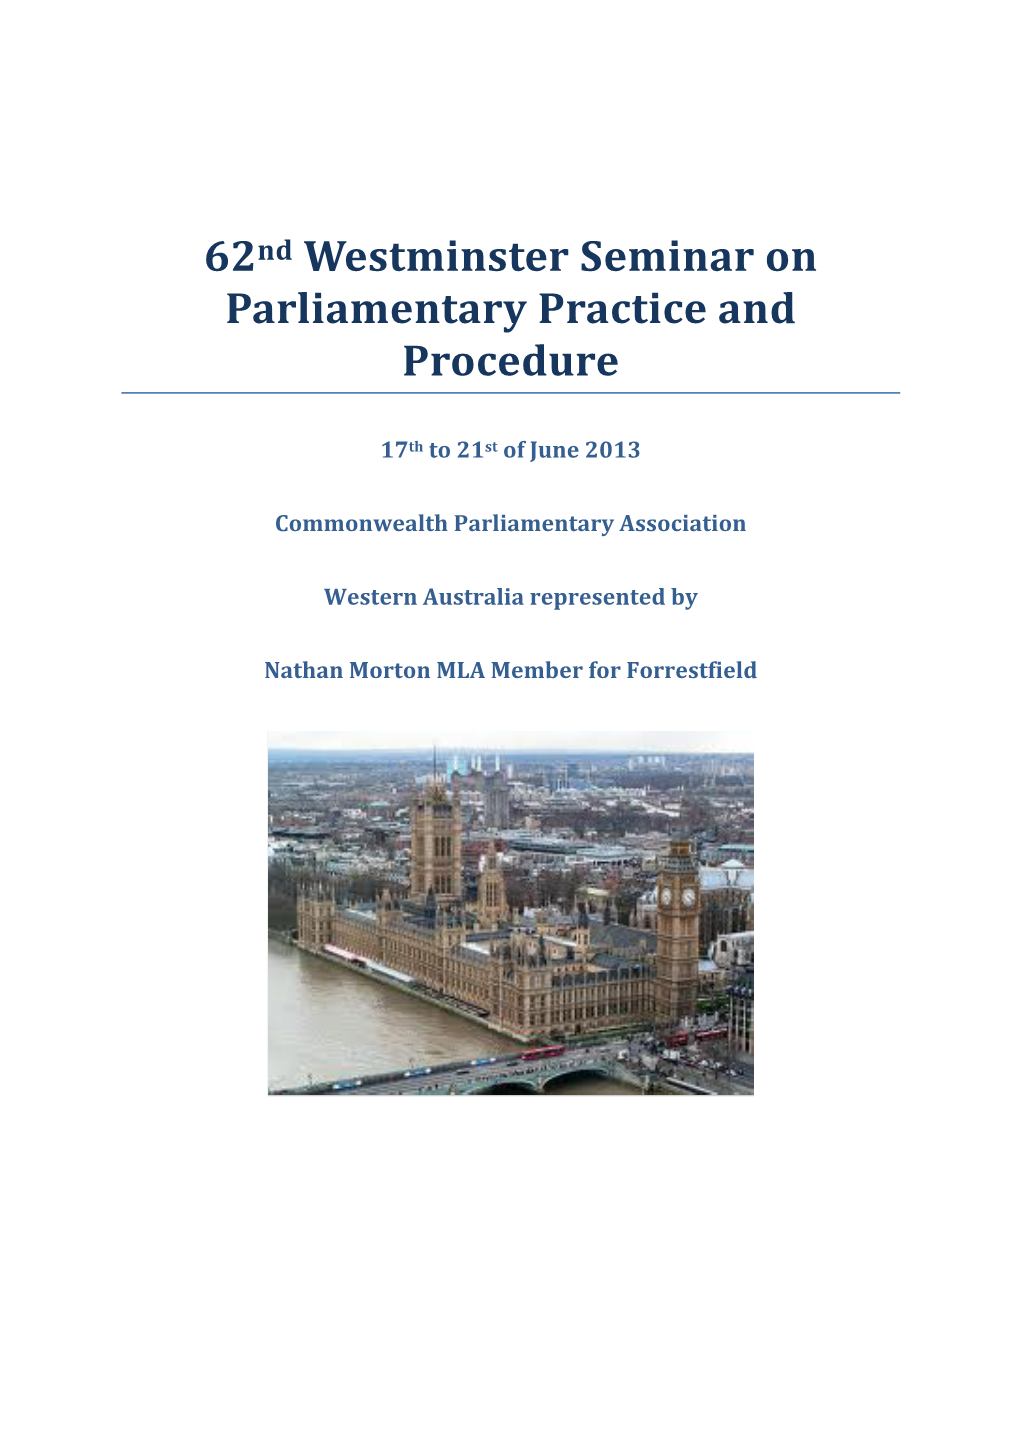 62Nd Westminster Seminar on Parliamentary Practice and Procedure